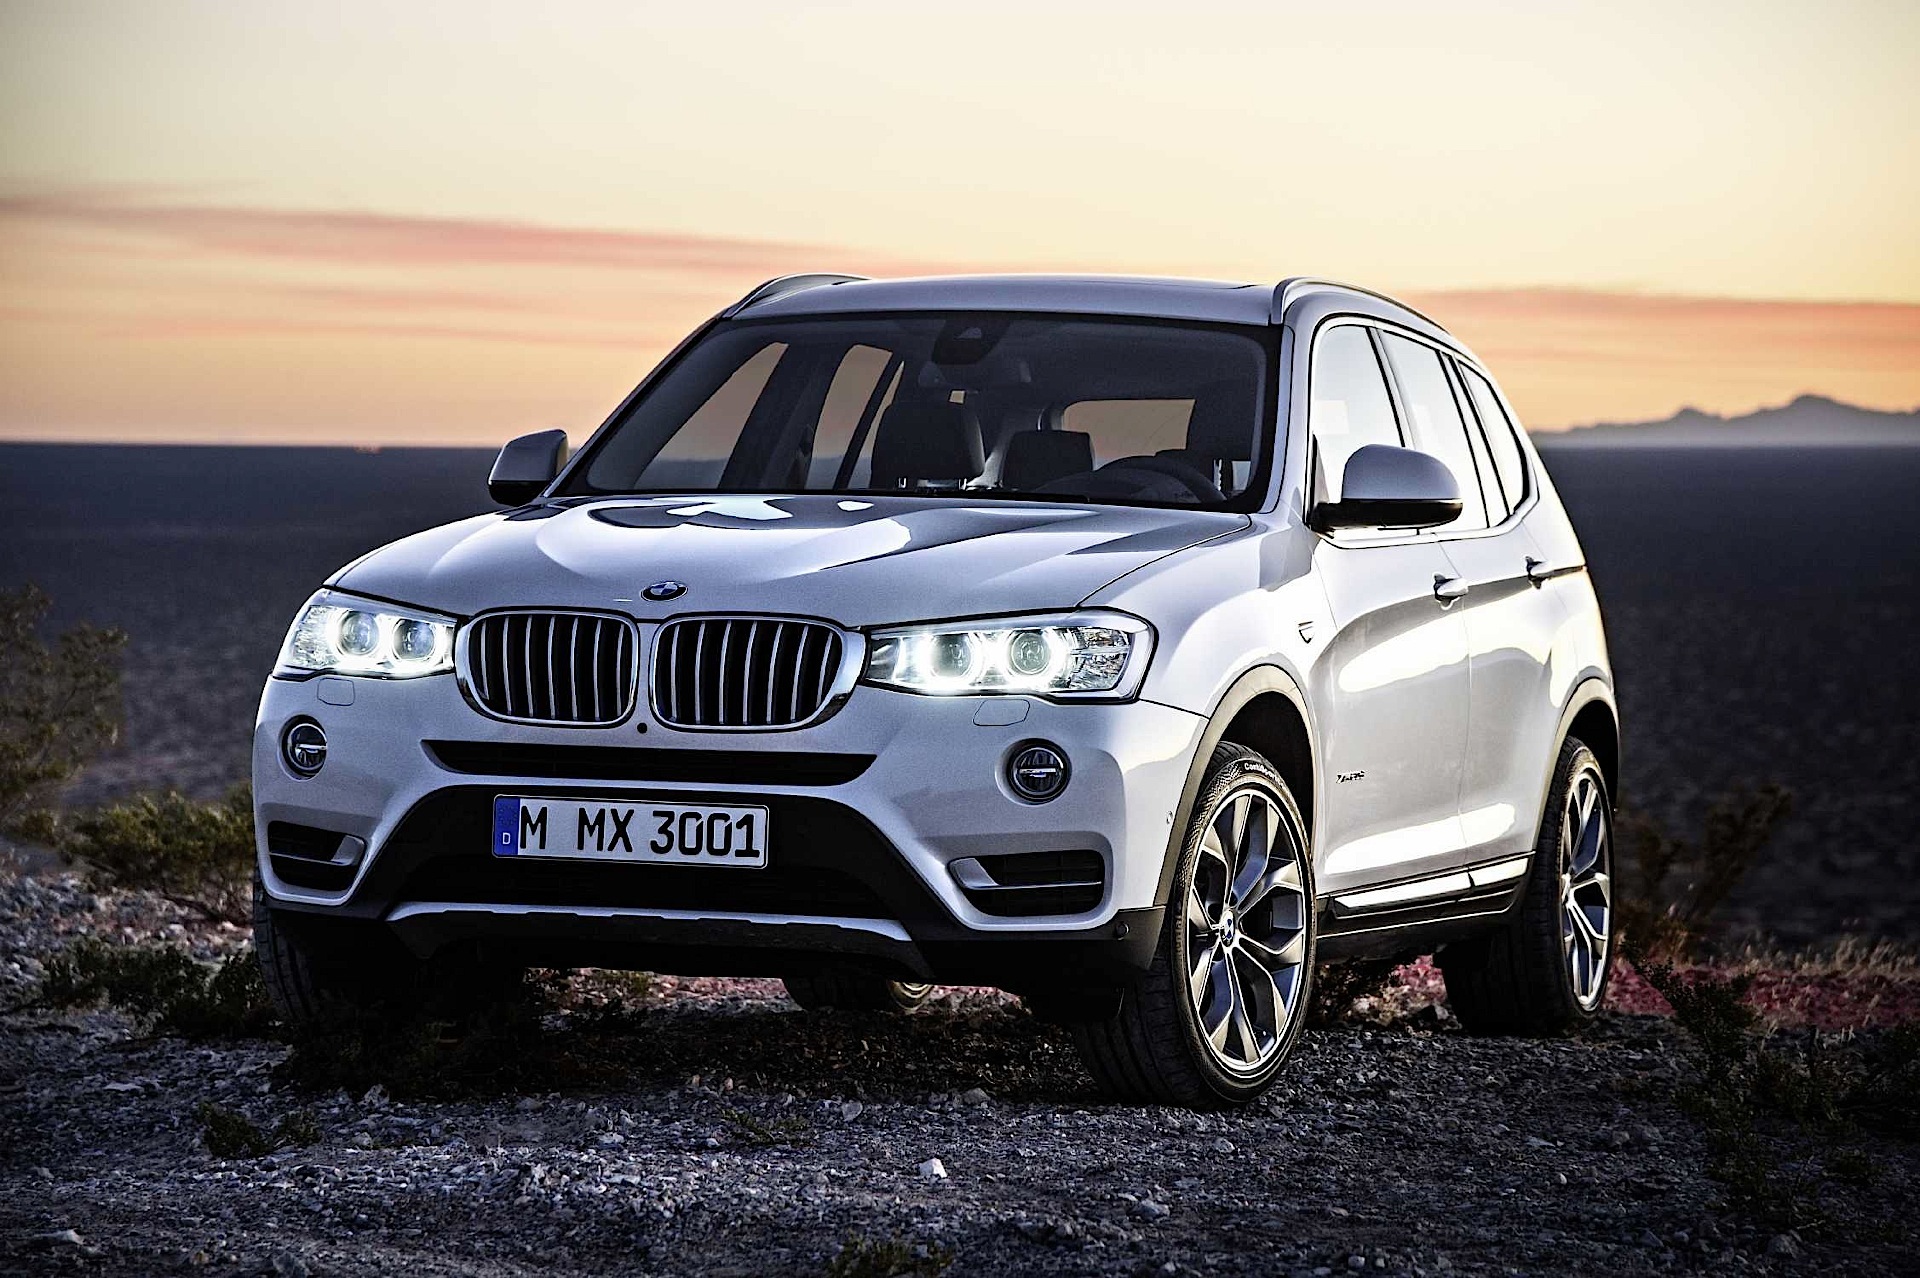 BMW X3 (F25) Photos and Specs. Photo: X3 (F25) BMW models and